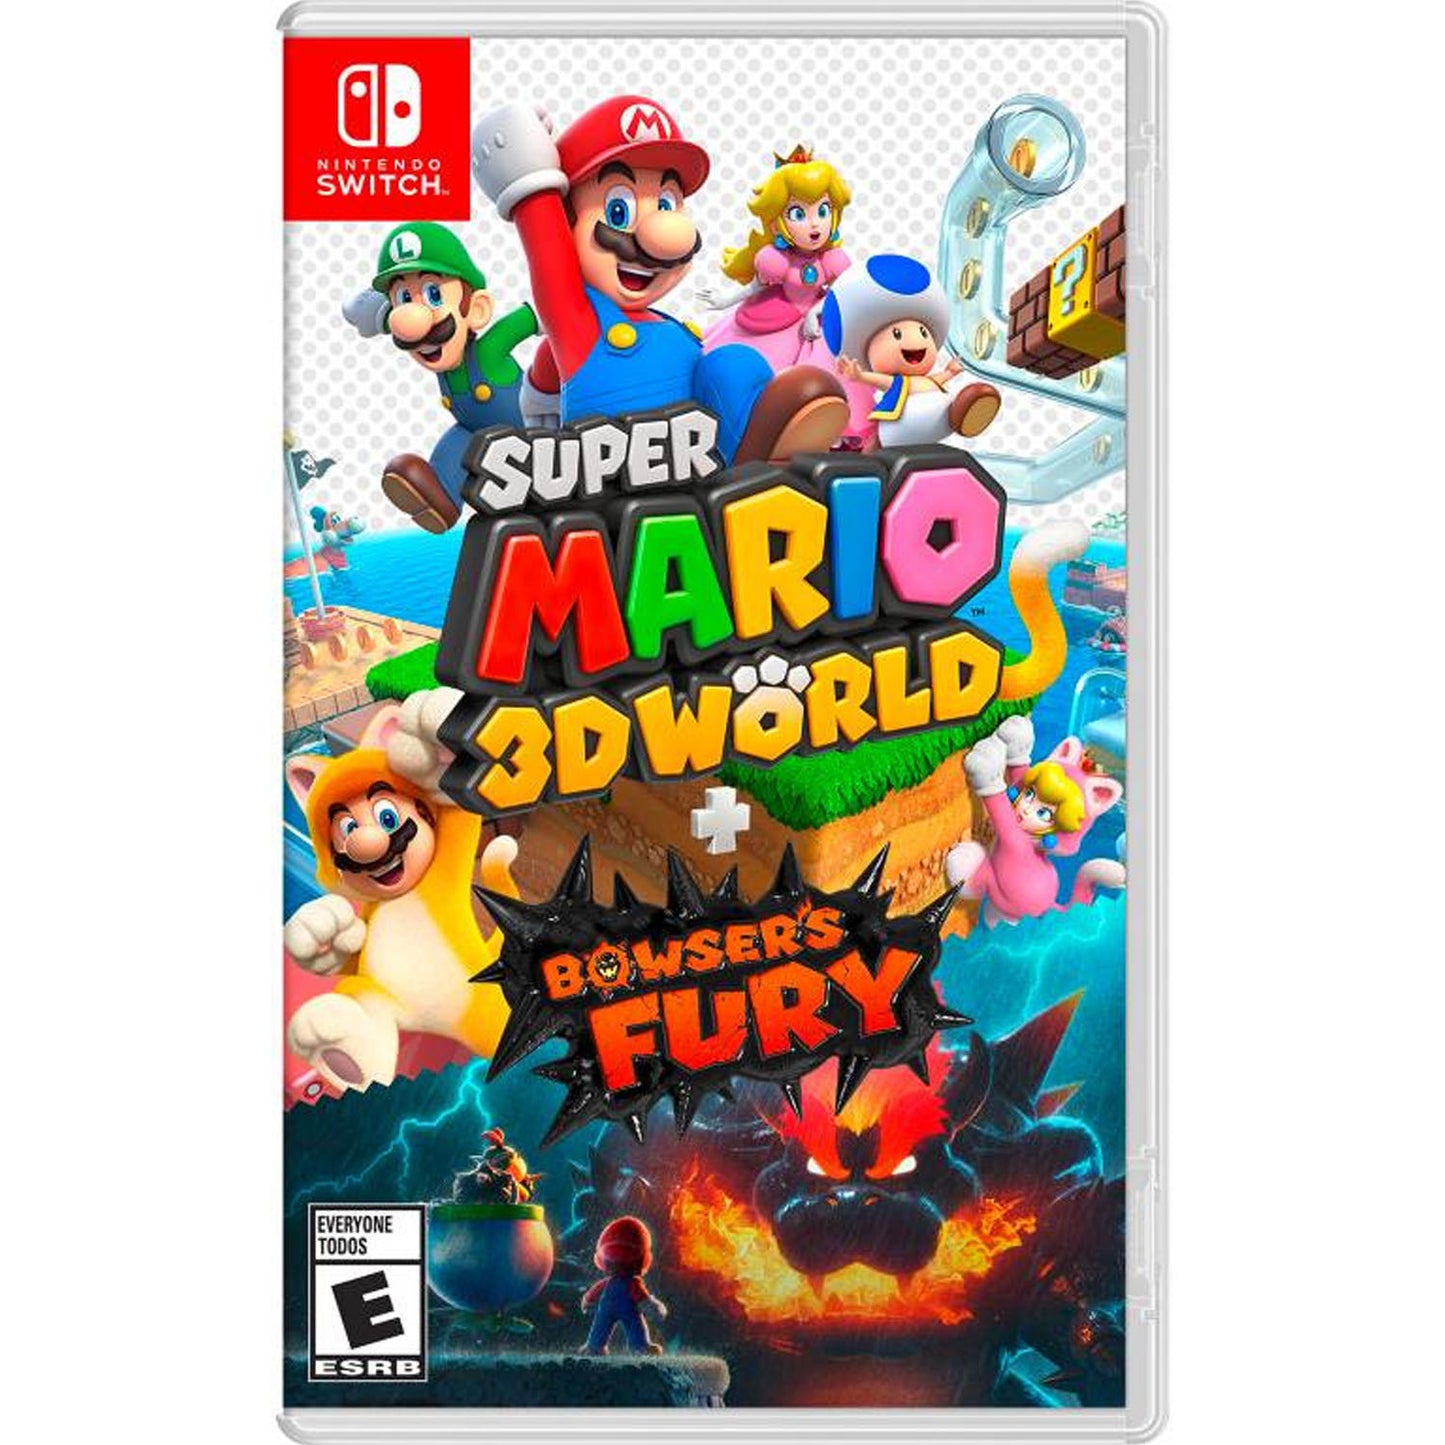 Super Mario 3D World + Browsers Fury Nintendo Switch